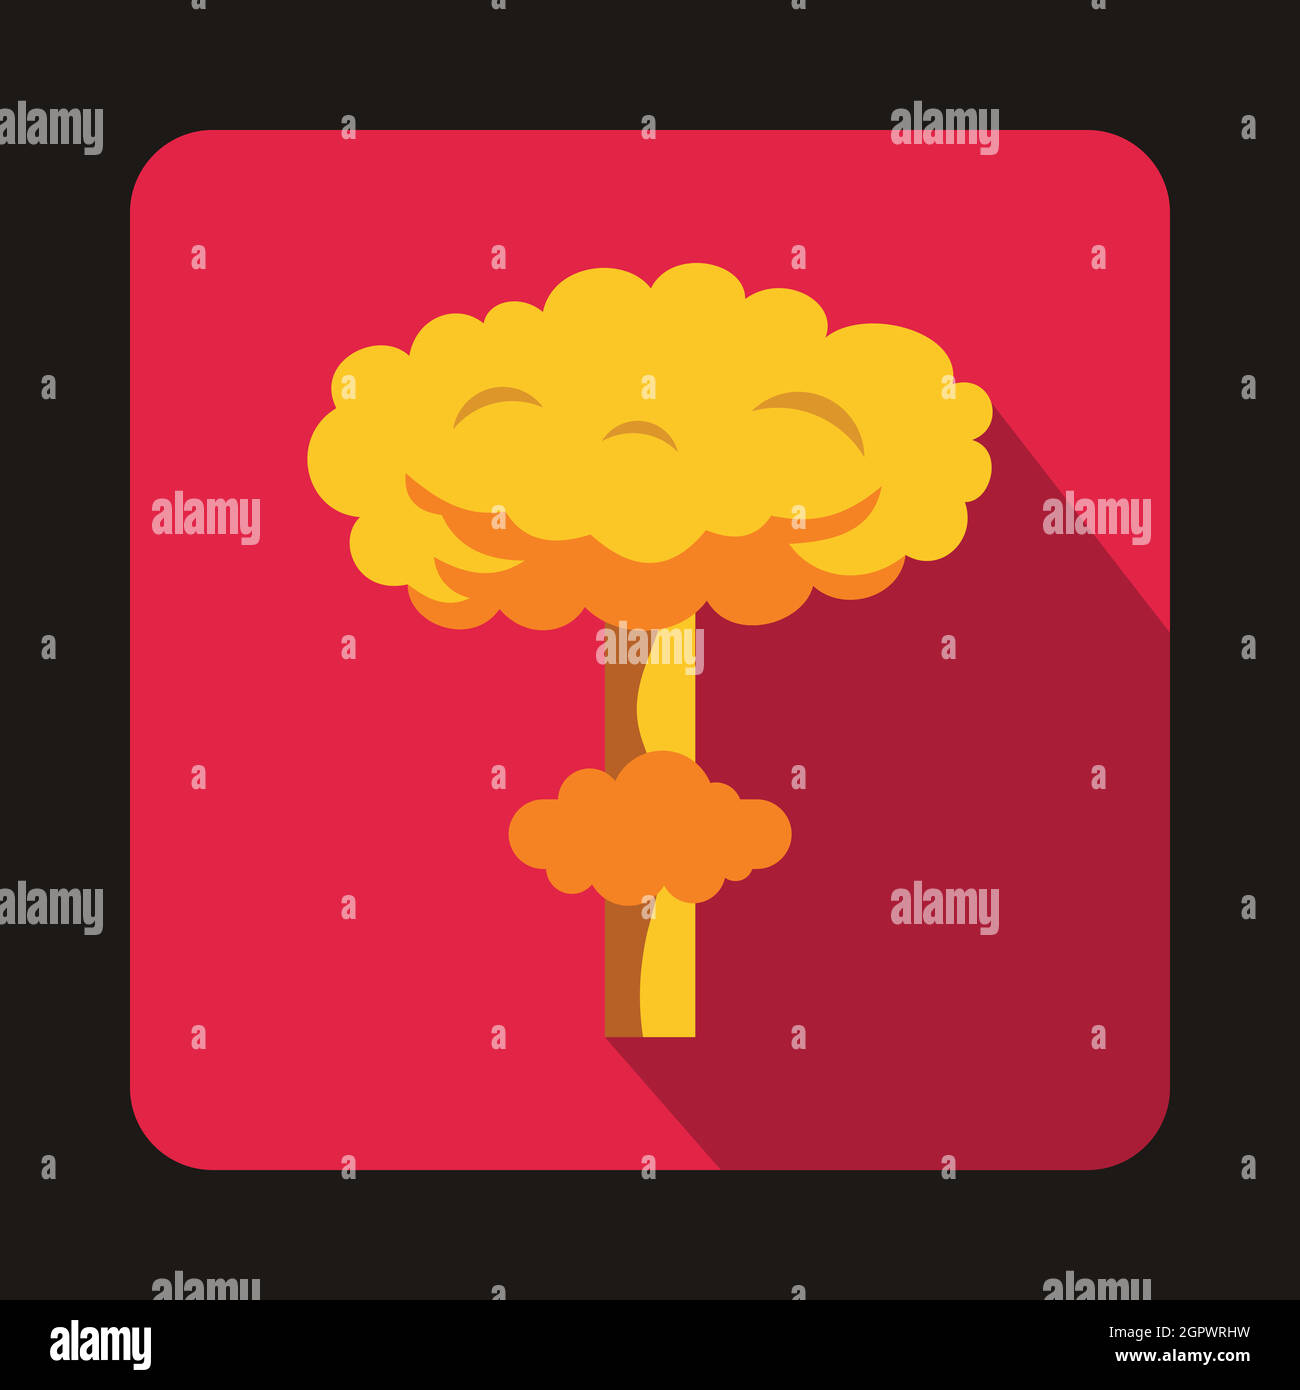 Nuclear explosion icon, flat style Stock Vector